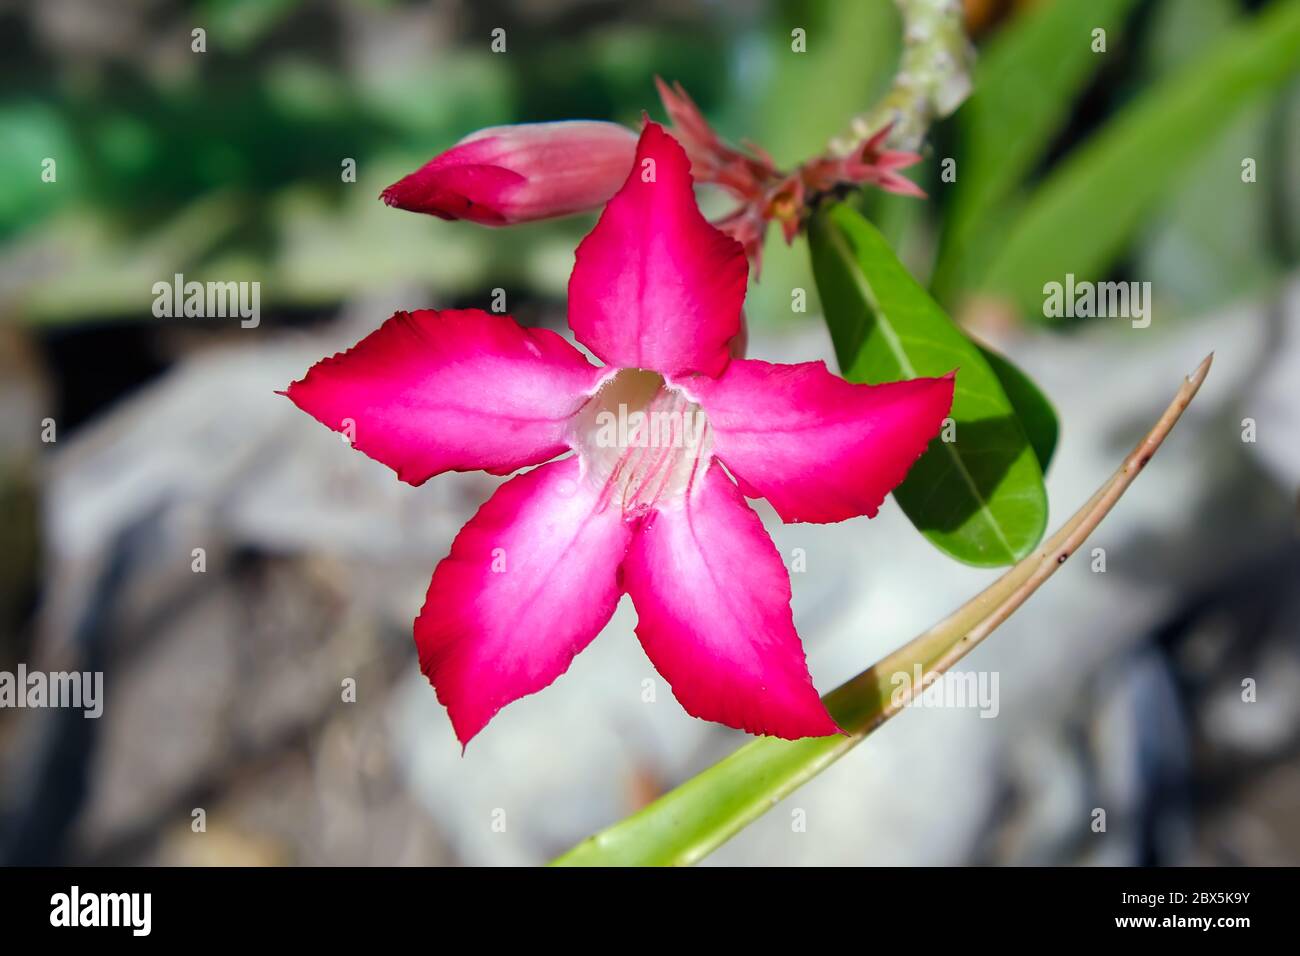 Adenium obesum is a species of flowering plant in the dogbane family, Apocynaceae, that is native to the Sahel regions, south of the Sahara Stock Photo